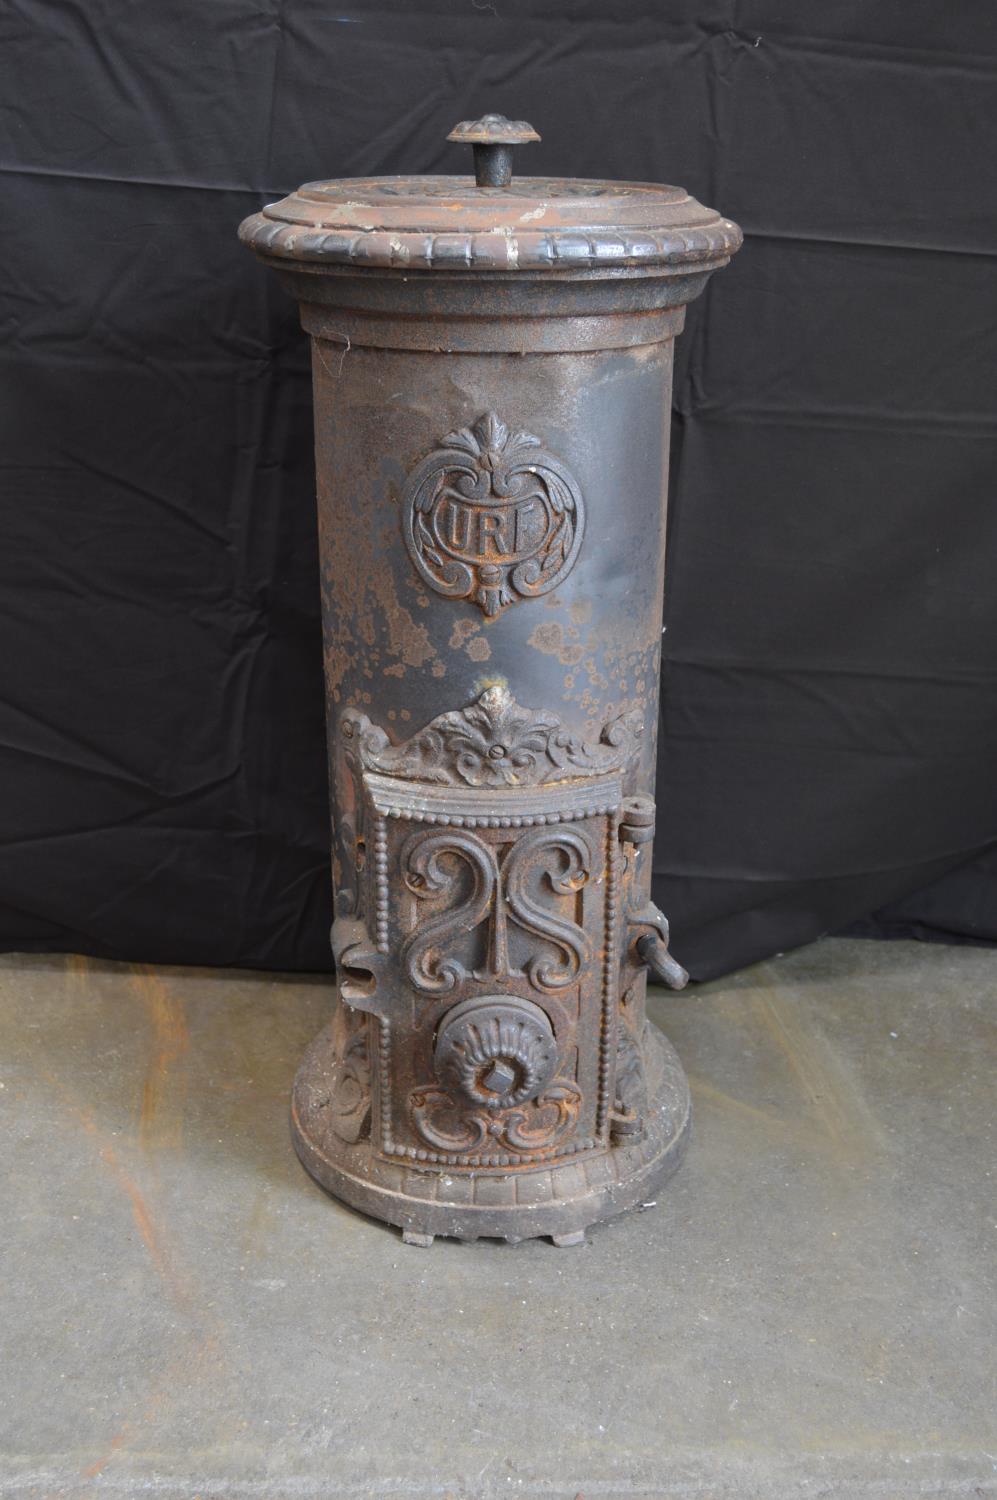 Iron URF wood burning stove - 69cm tall Please note descriptions are not condition reports, please